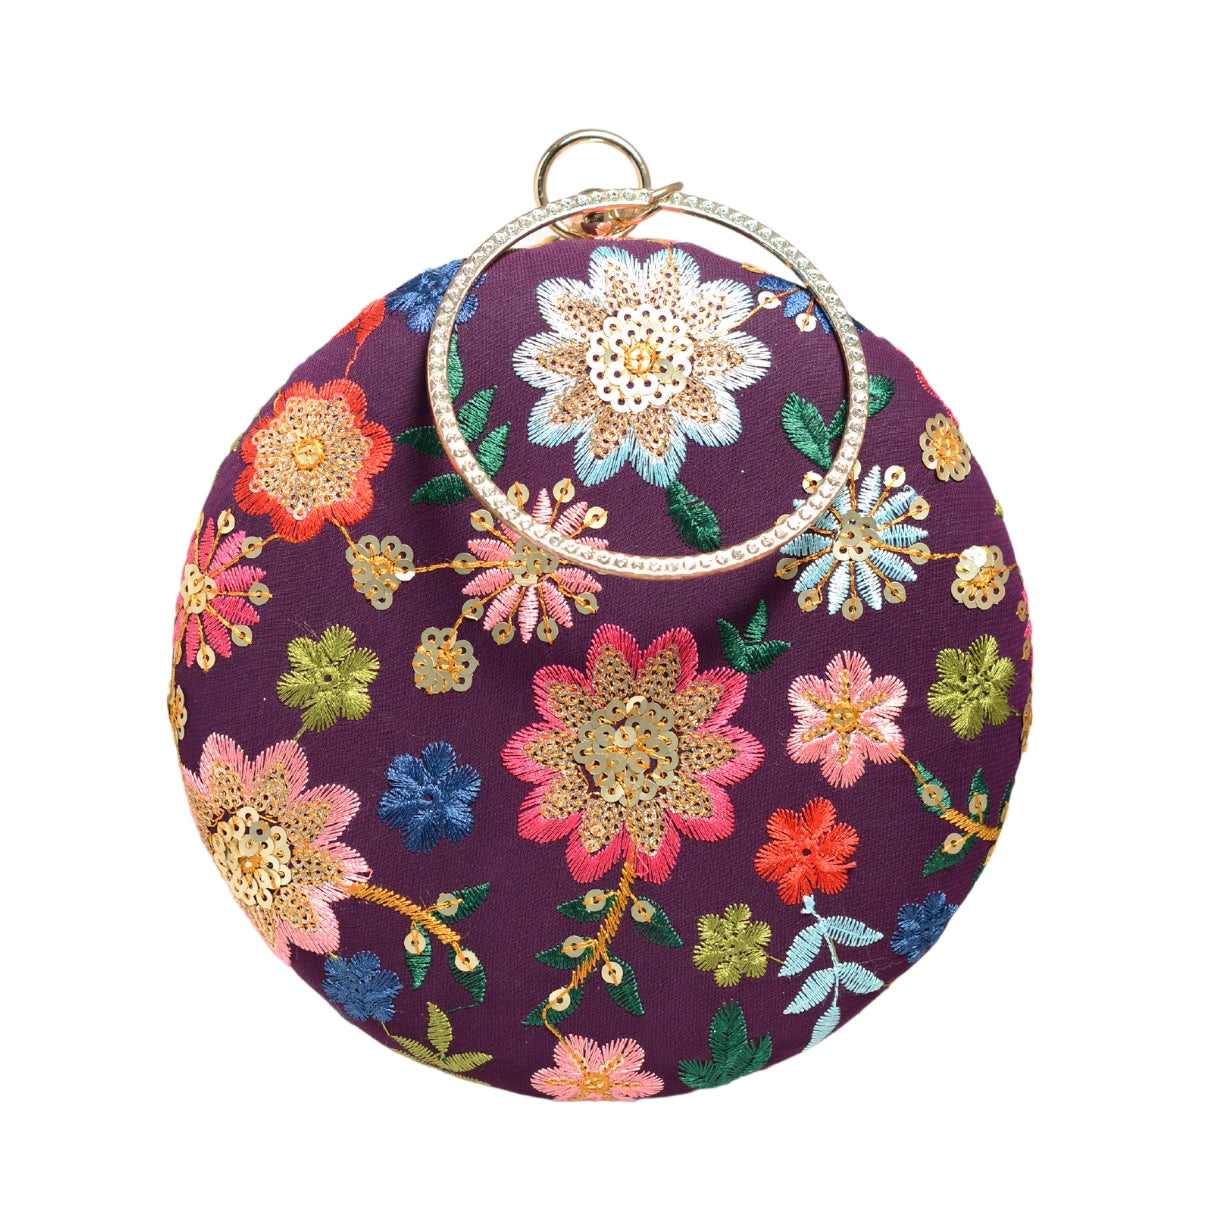 Wine Floral Embroidery Round Clutch